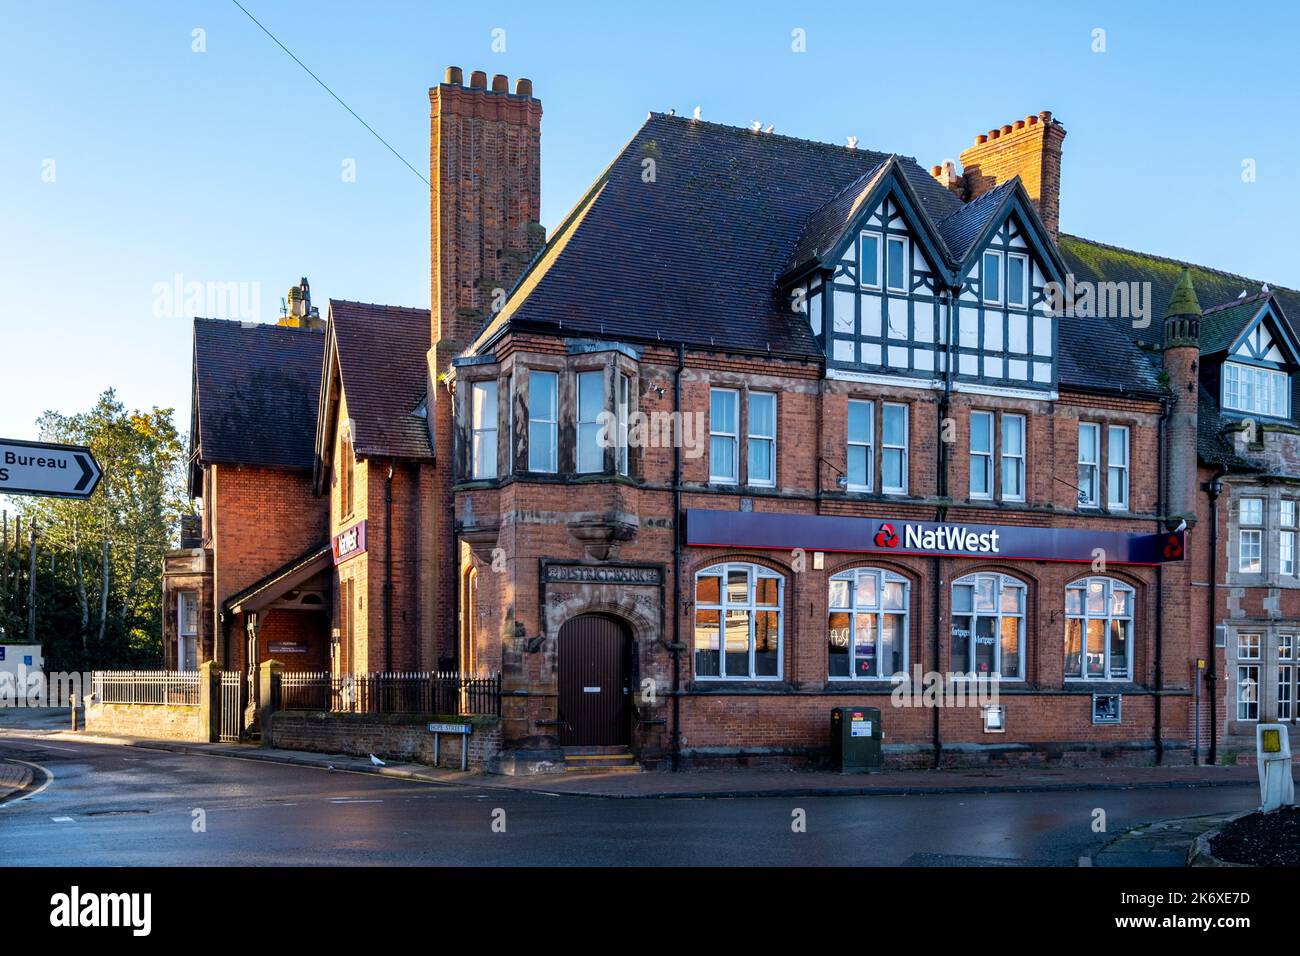 Natwest bank in town centre of Sandbach Cheshire UK Stock Photo